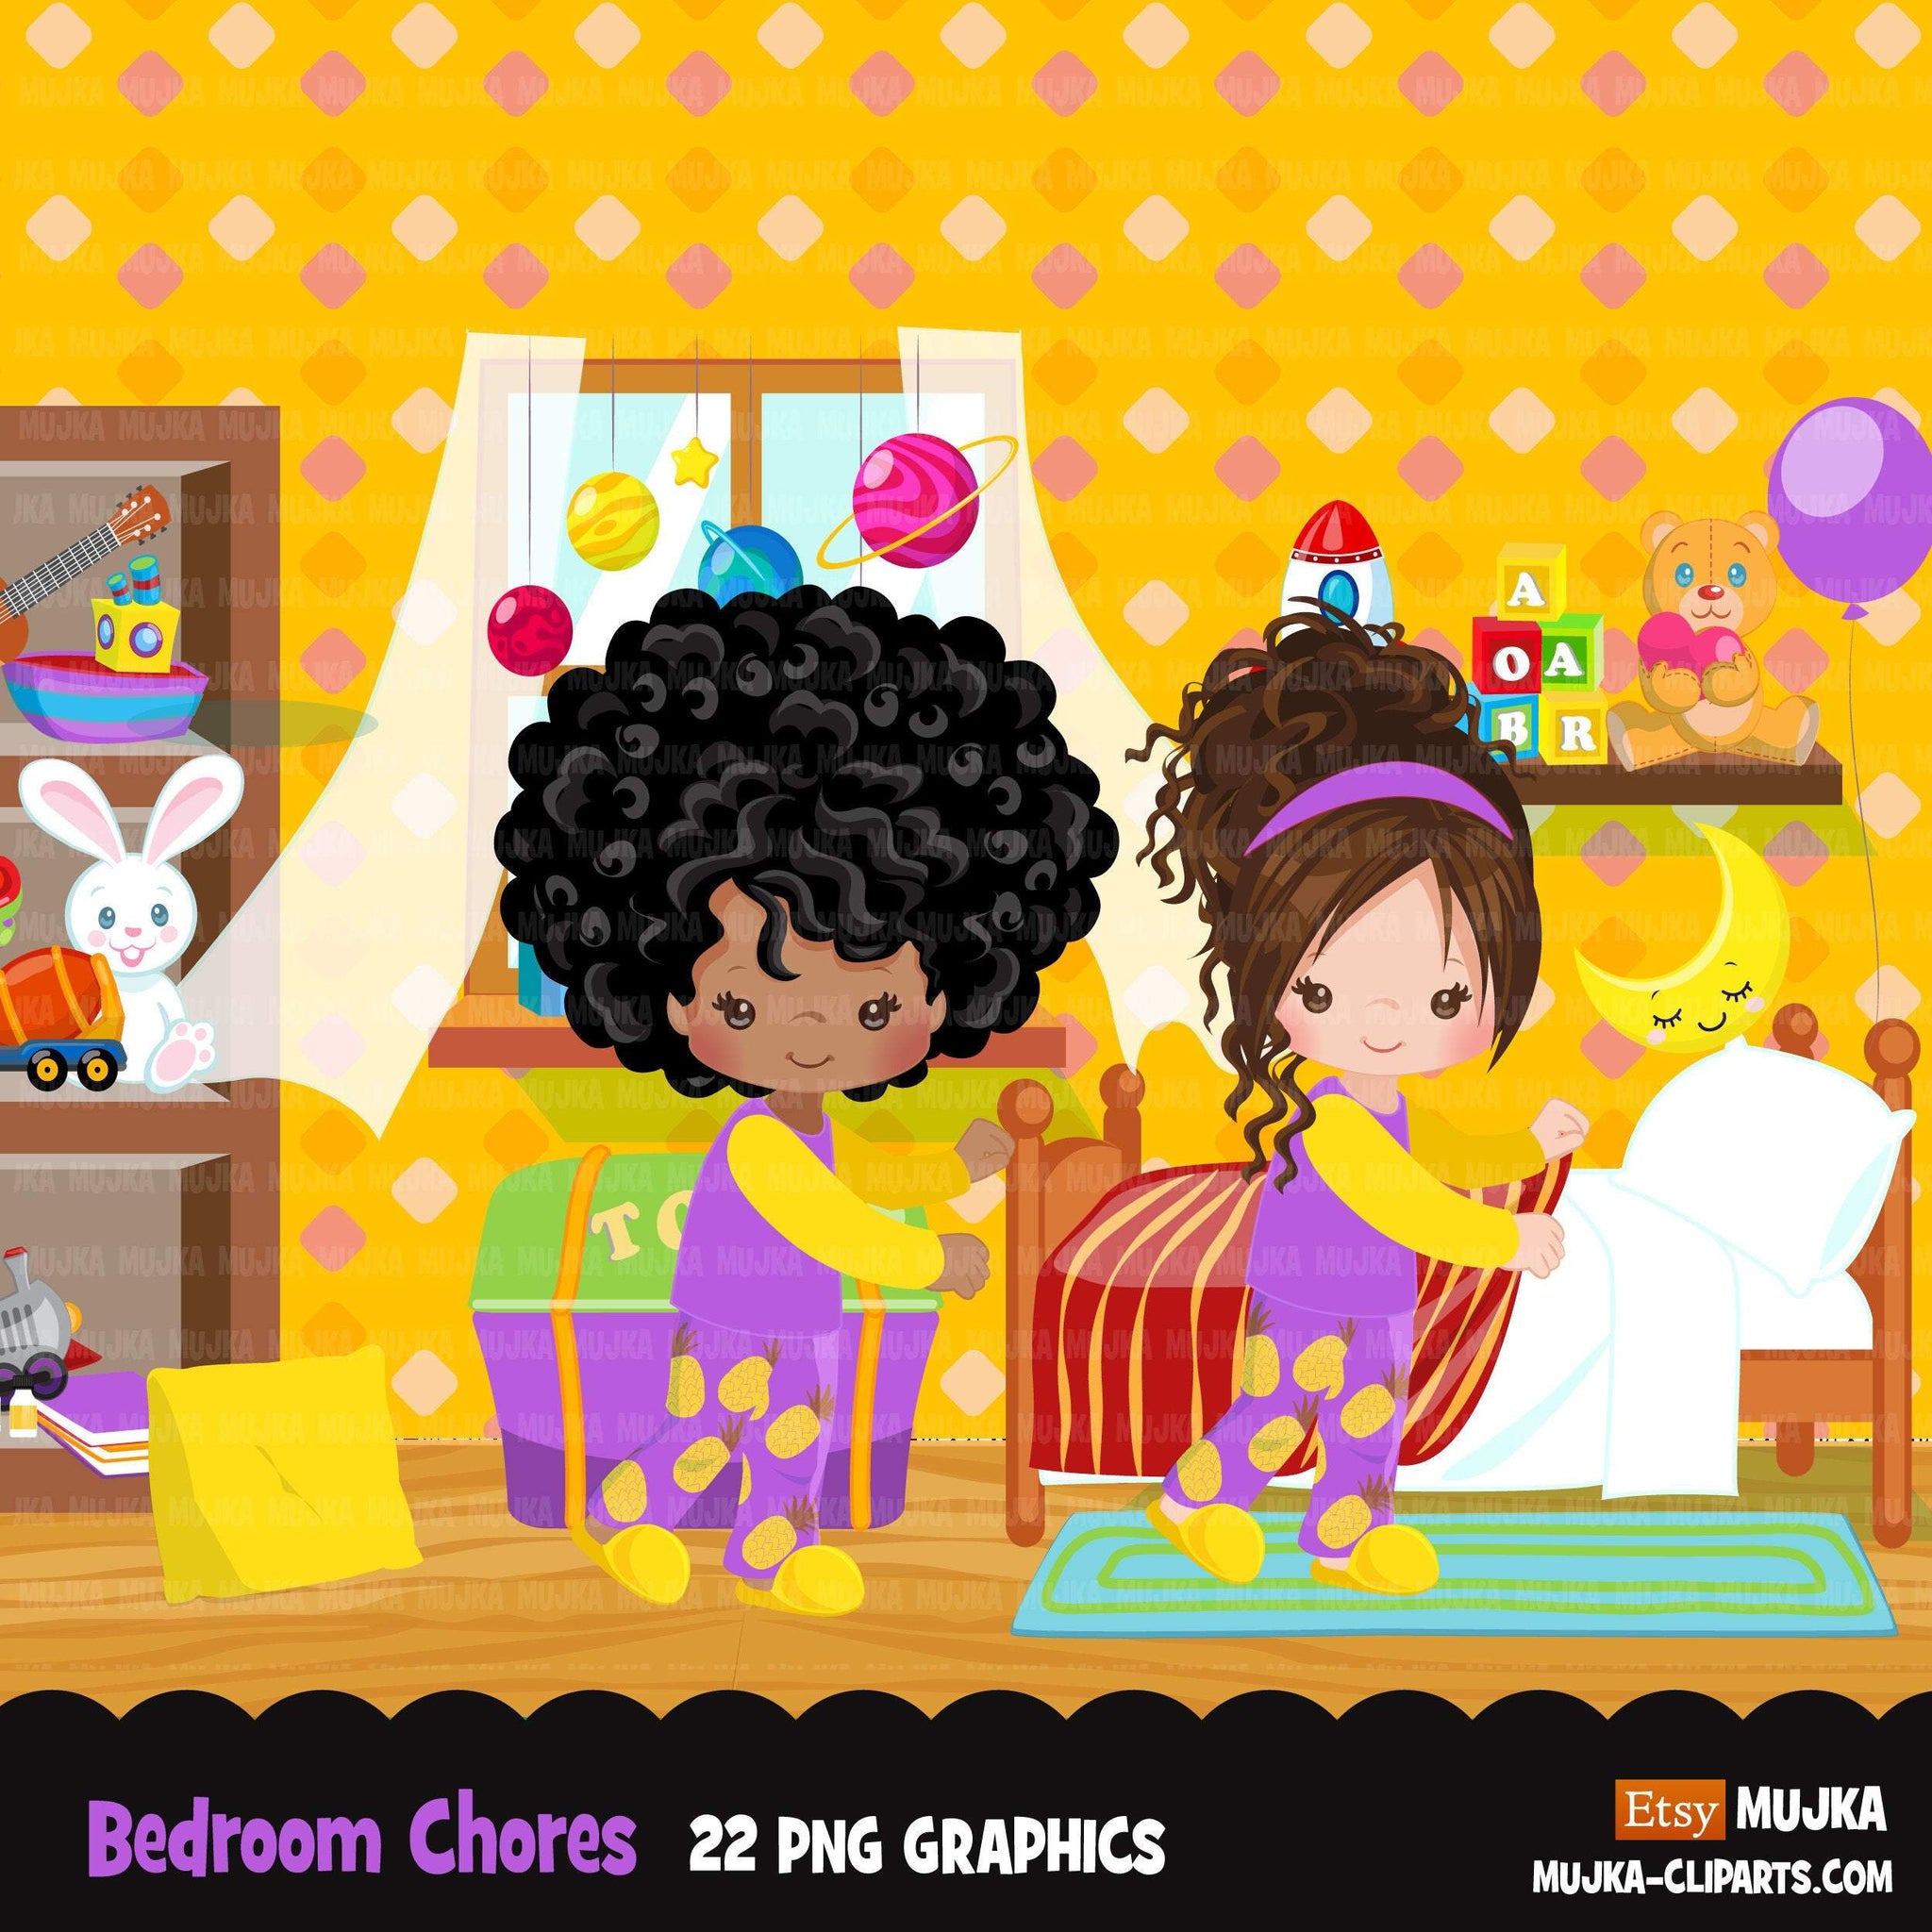 Chores Clipart, bedroom chores, making bed, children's room sublimation graphics, black girls PNG clip art